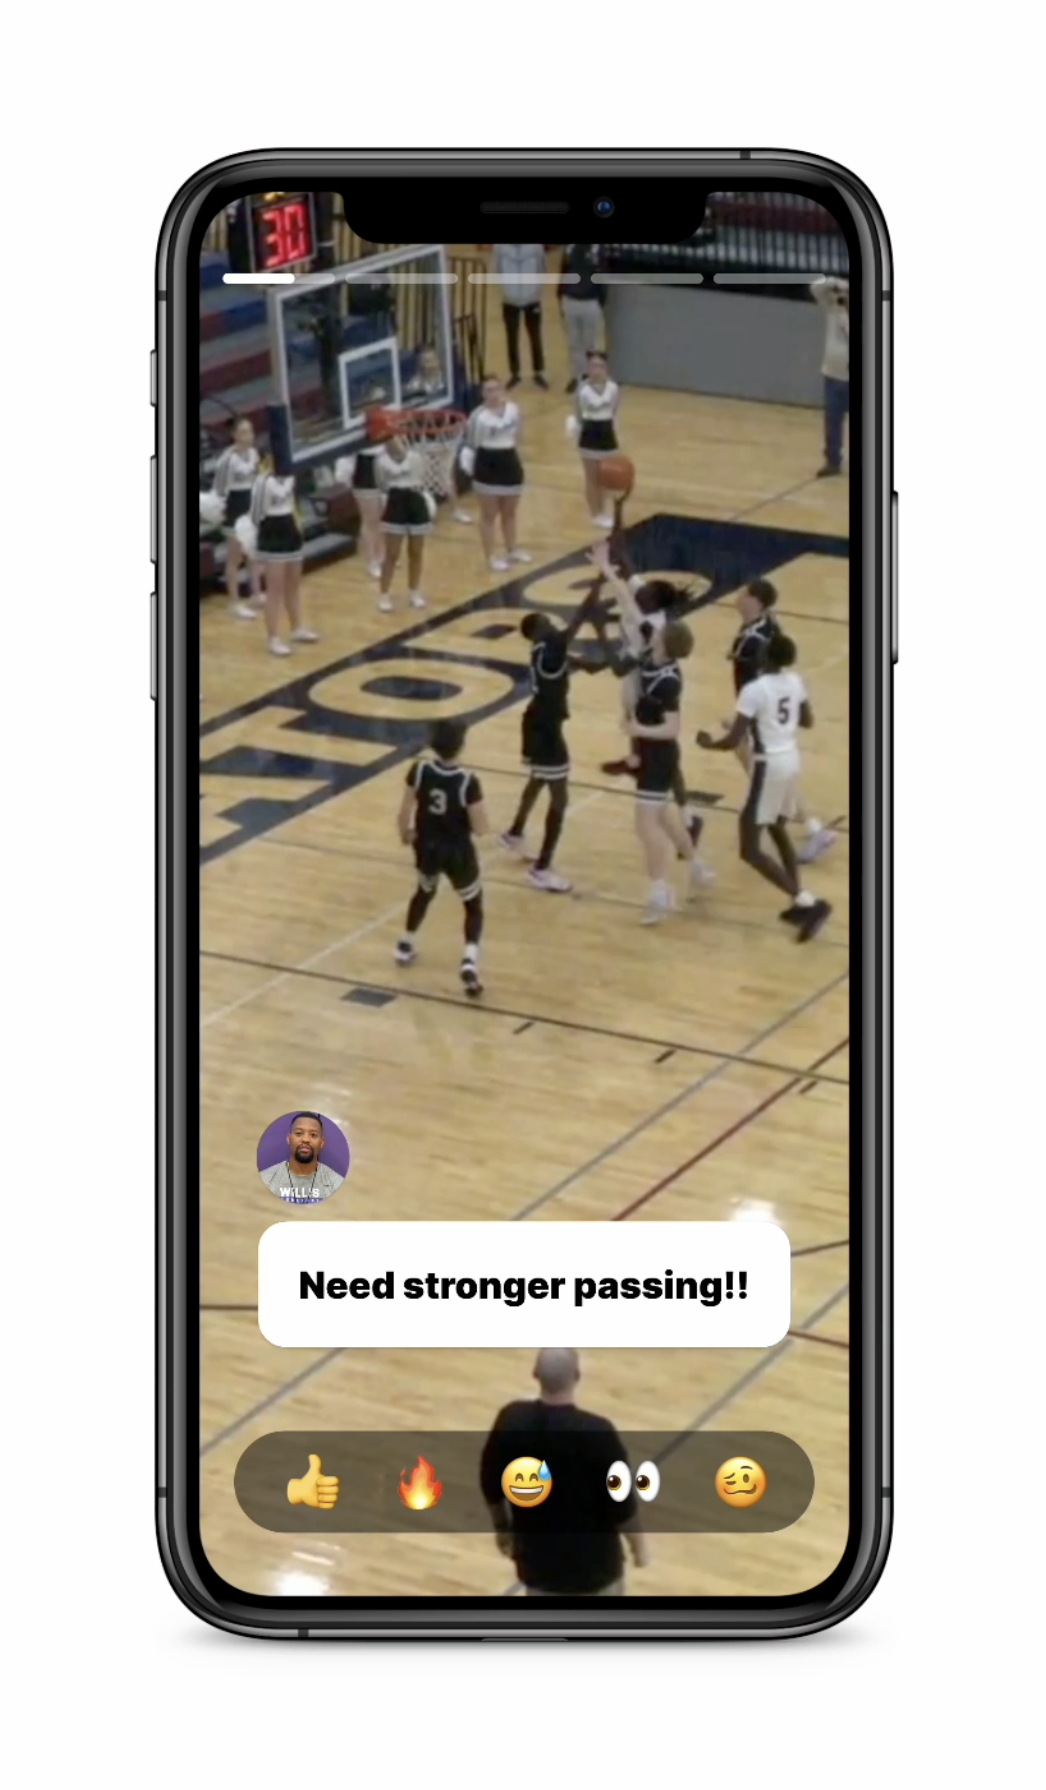 An iPhone displaying an video interface. There are sections at the top indicating different clips and how far into the clip the user currently is. There is an avatar of a coach and below that a textual comment that says 'Need stronger passing!!'. At the bottom of the screen is a small bar with five emojis. The video shows a basketball game where a player is attempting to make a lay-up.